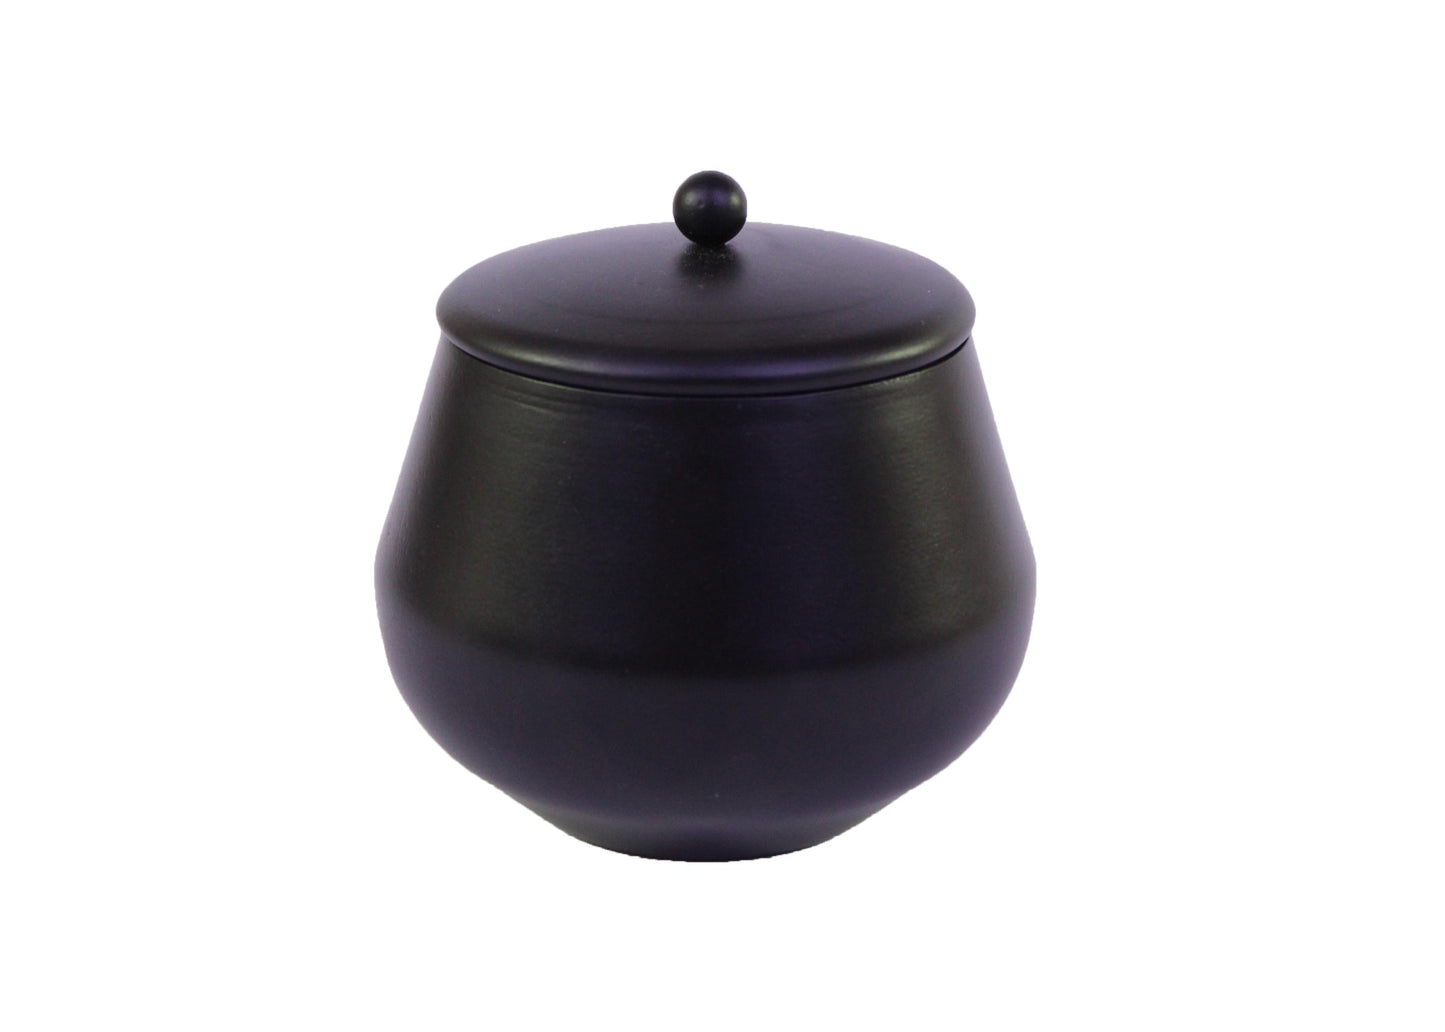 Hosley Scented Metal Black Jar Candles For Home Decoration, Festival, Diwali Candles,Highly Scented & Long Lasting